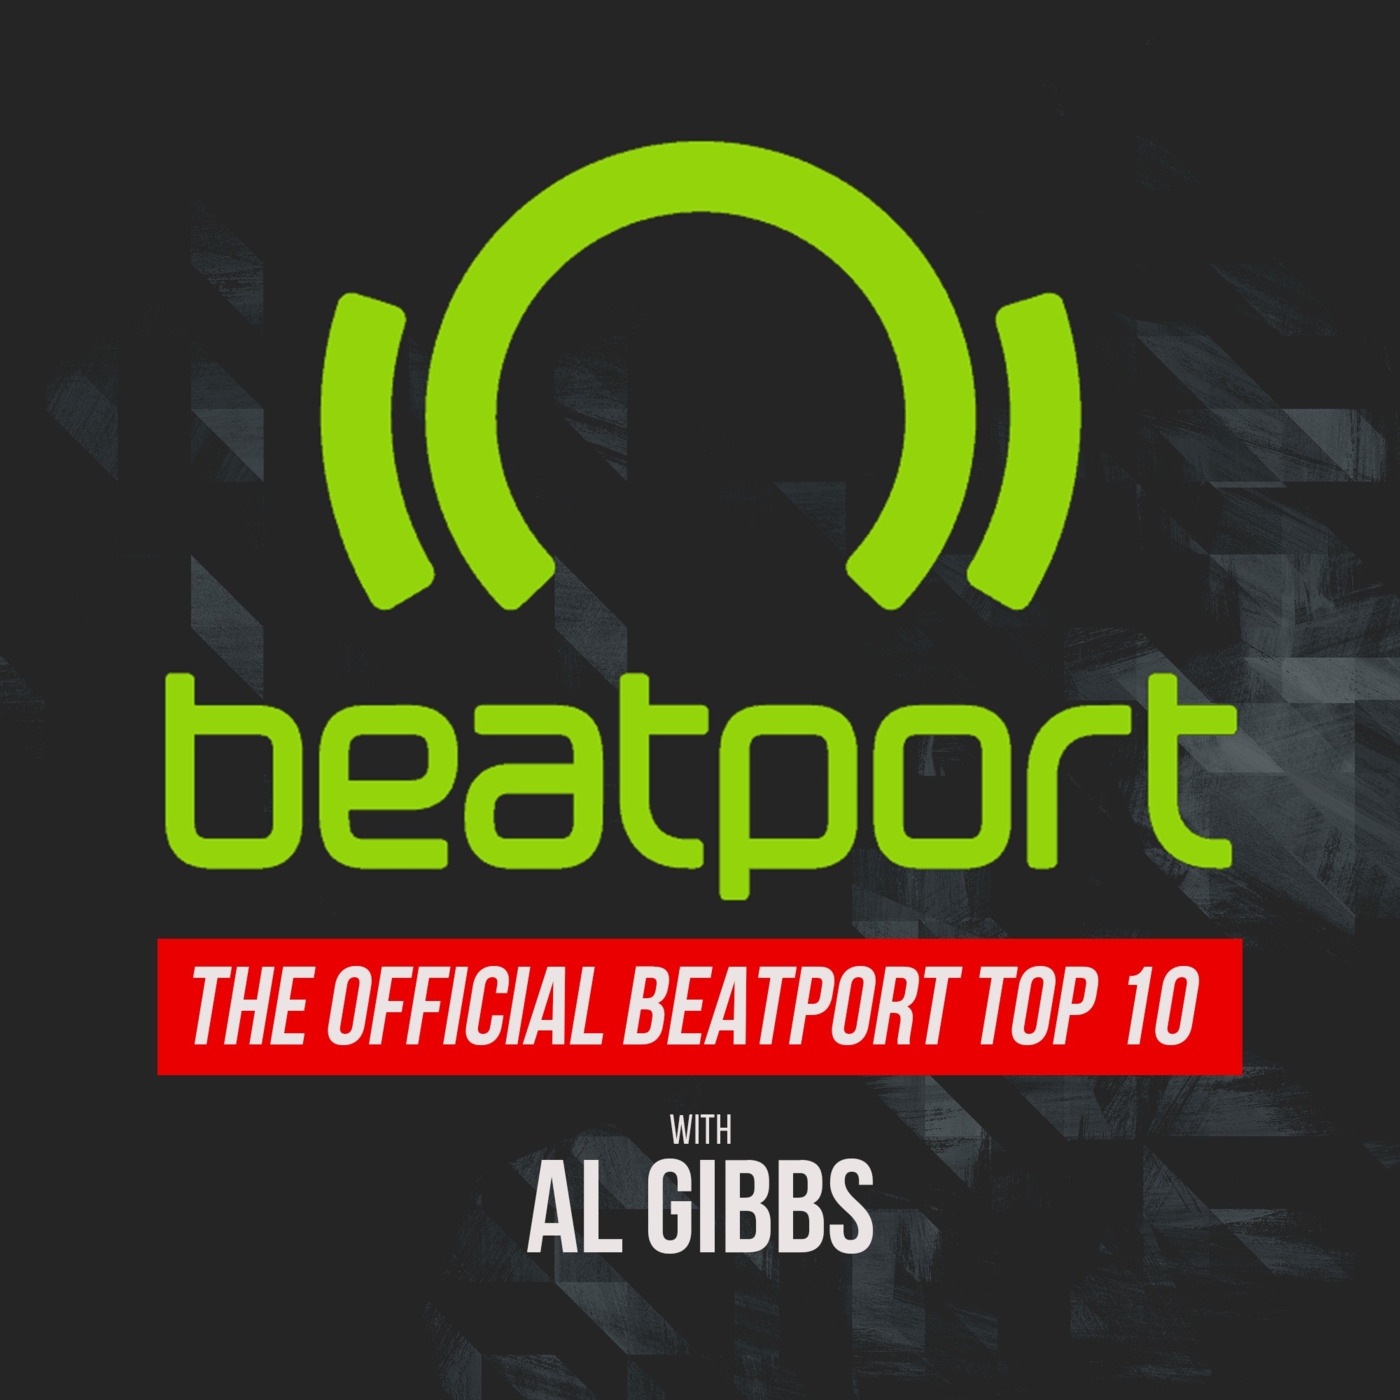 Episode 64: THE OFFICIAL BEATPORT TOP 10 WITH AL GIBBS (week 12 2021)